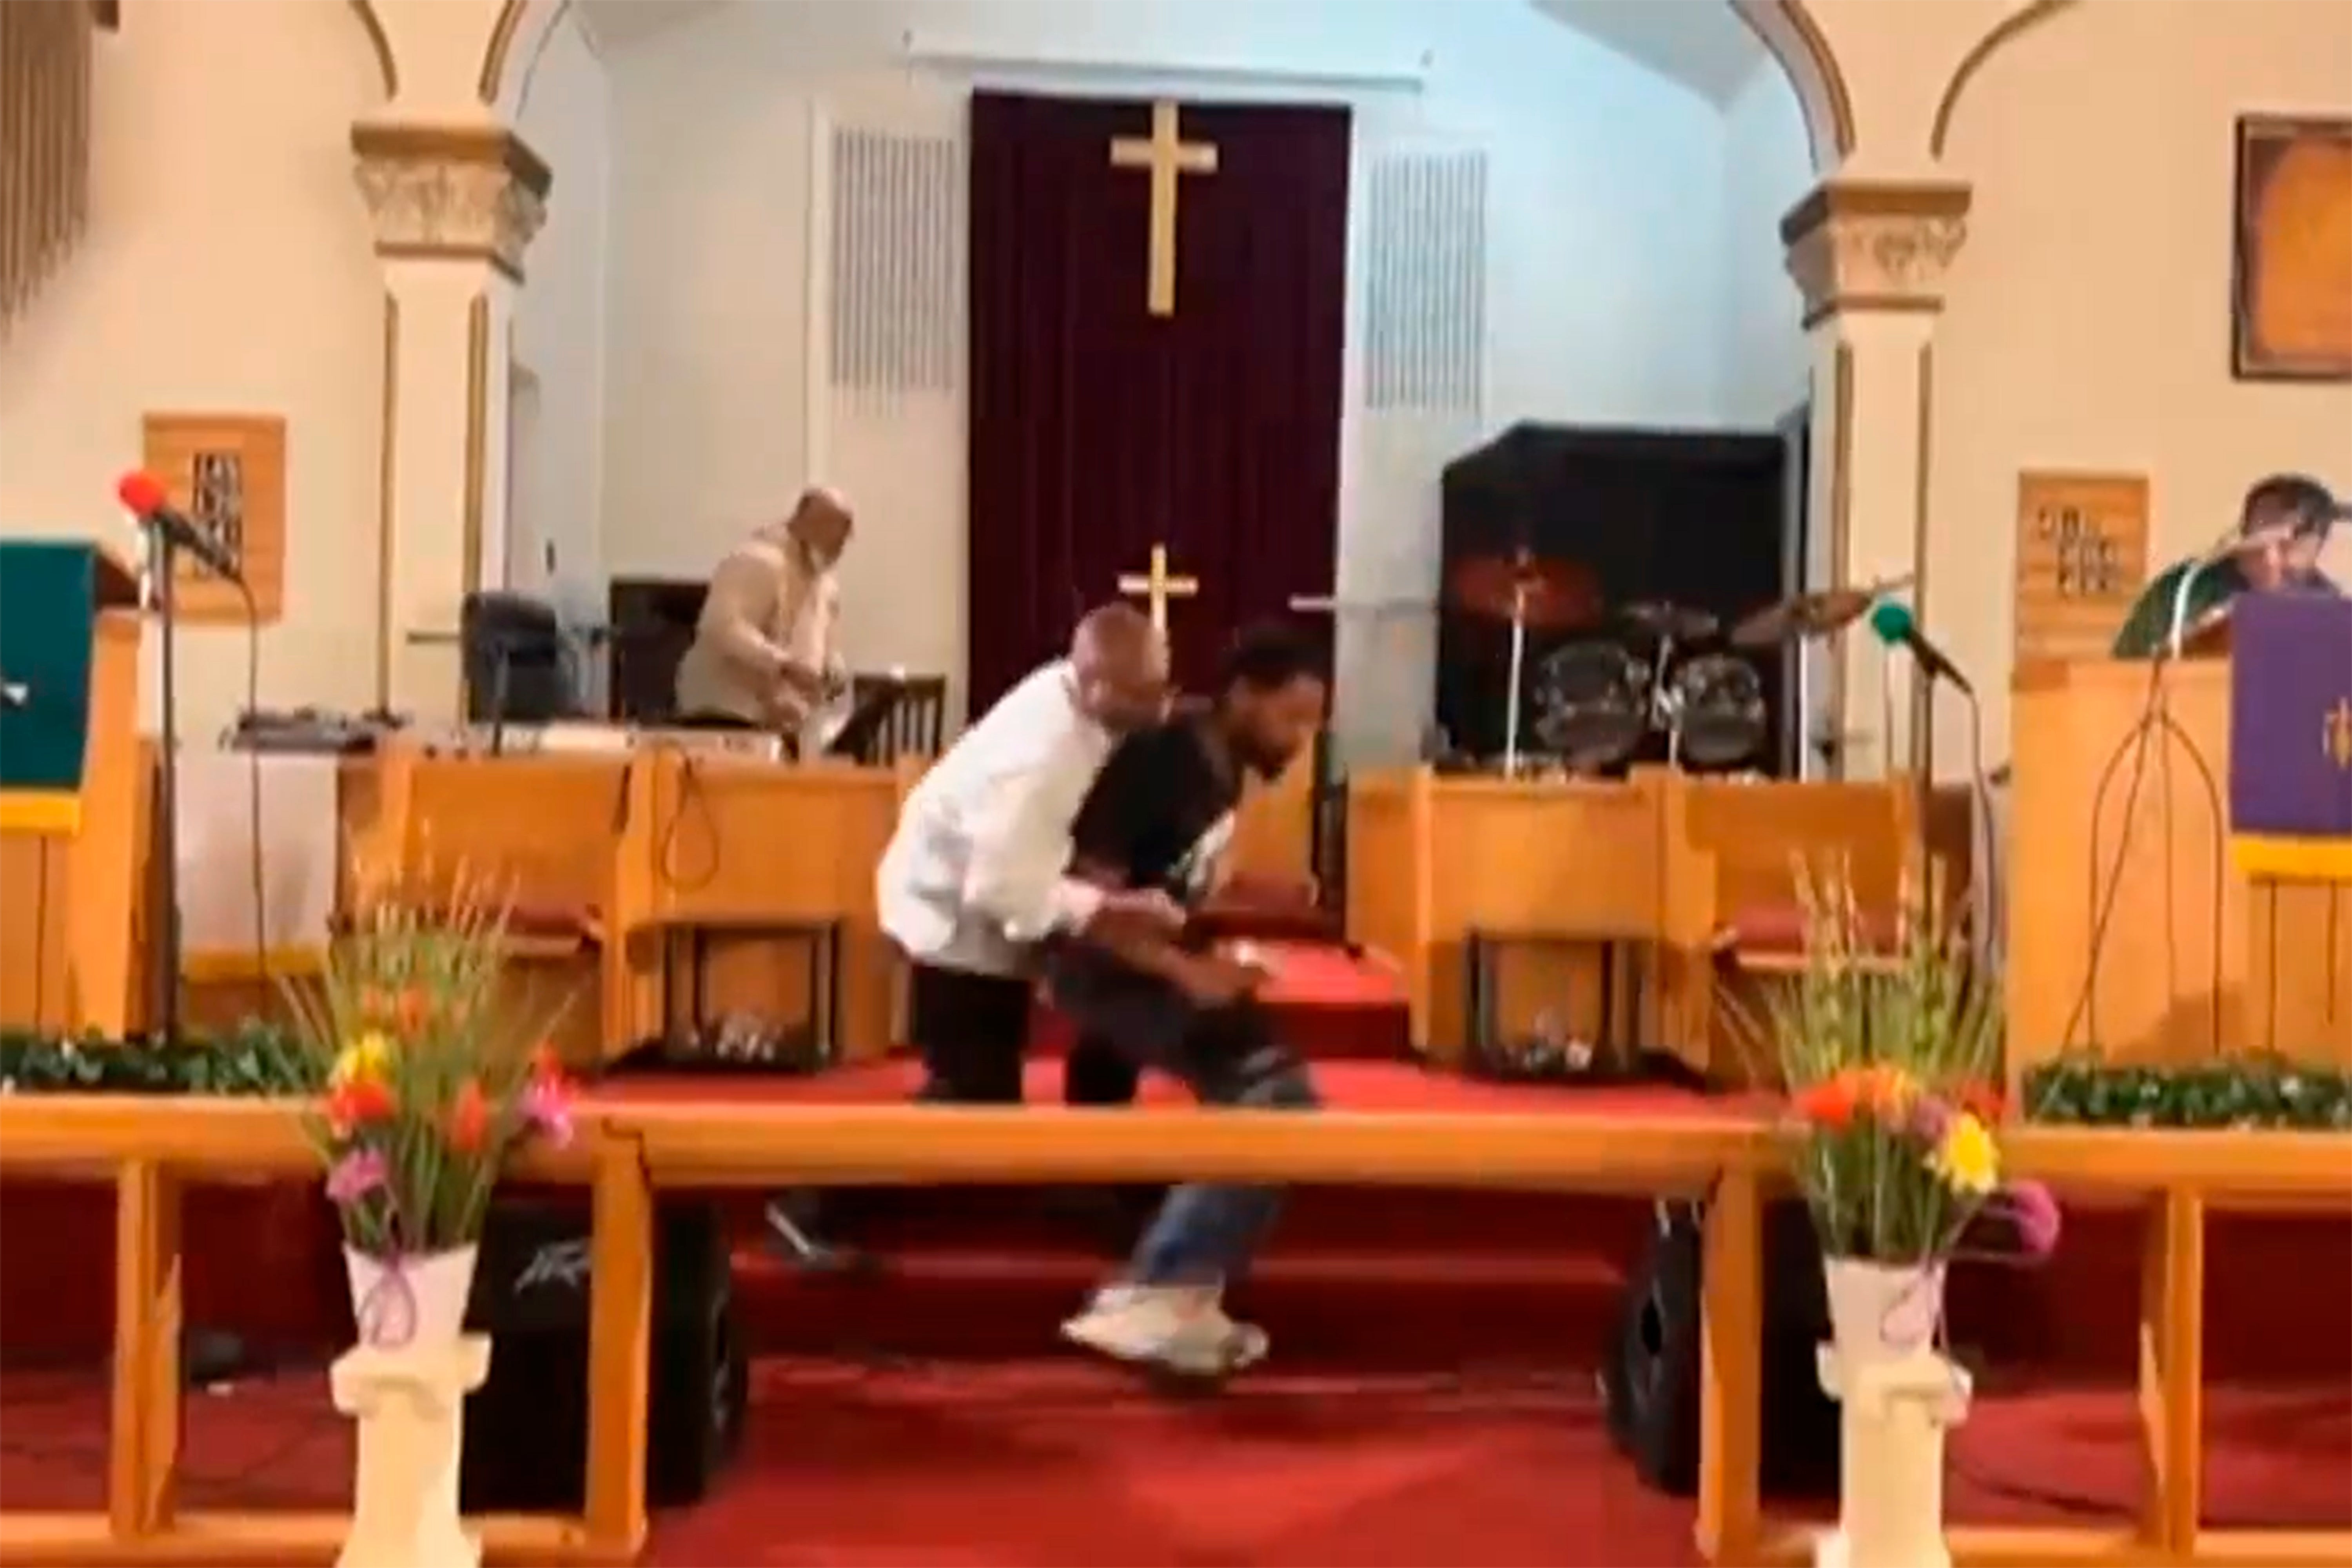 A member of the congregation tackles the gunman to the floor at Jesus’ Dwelling Place Church in North Braddock